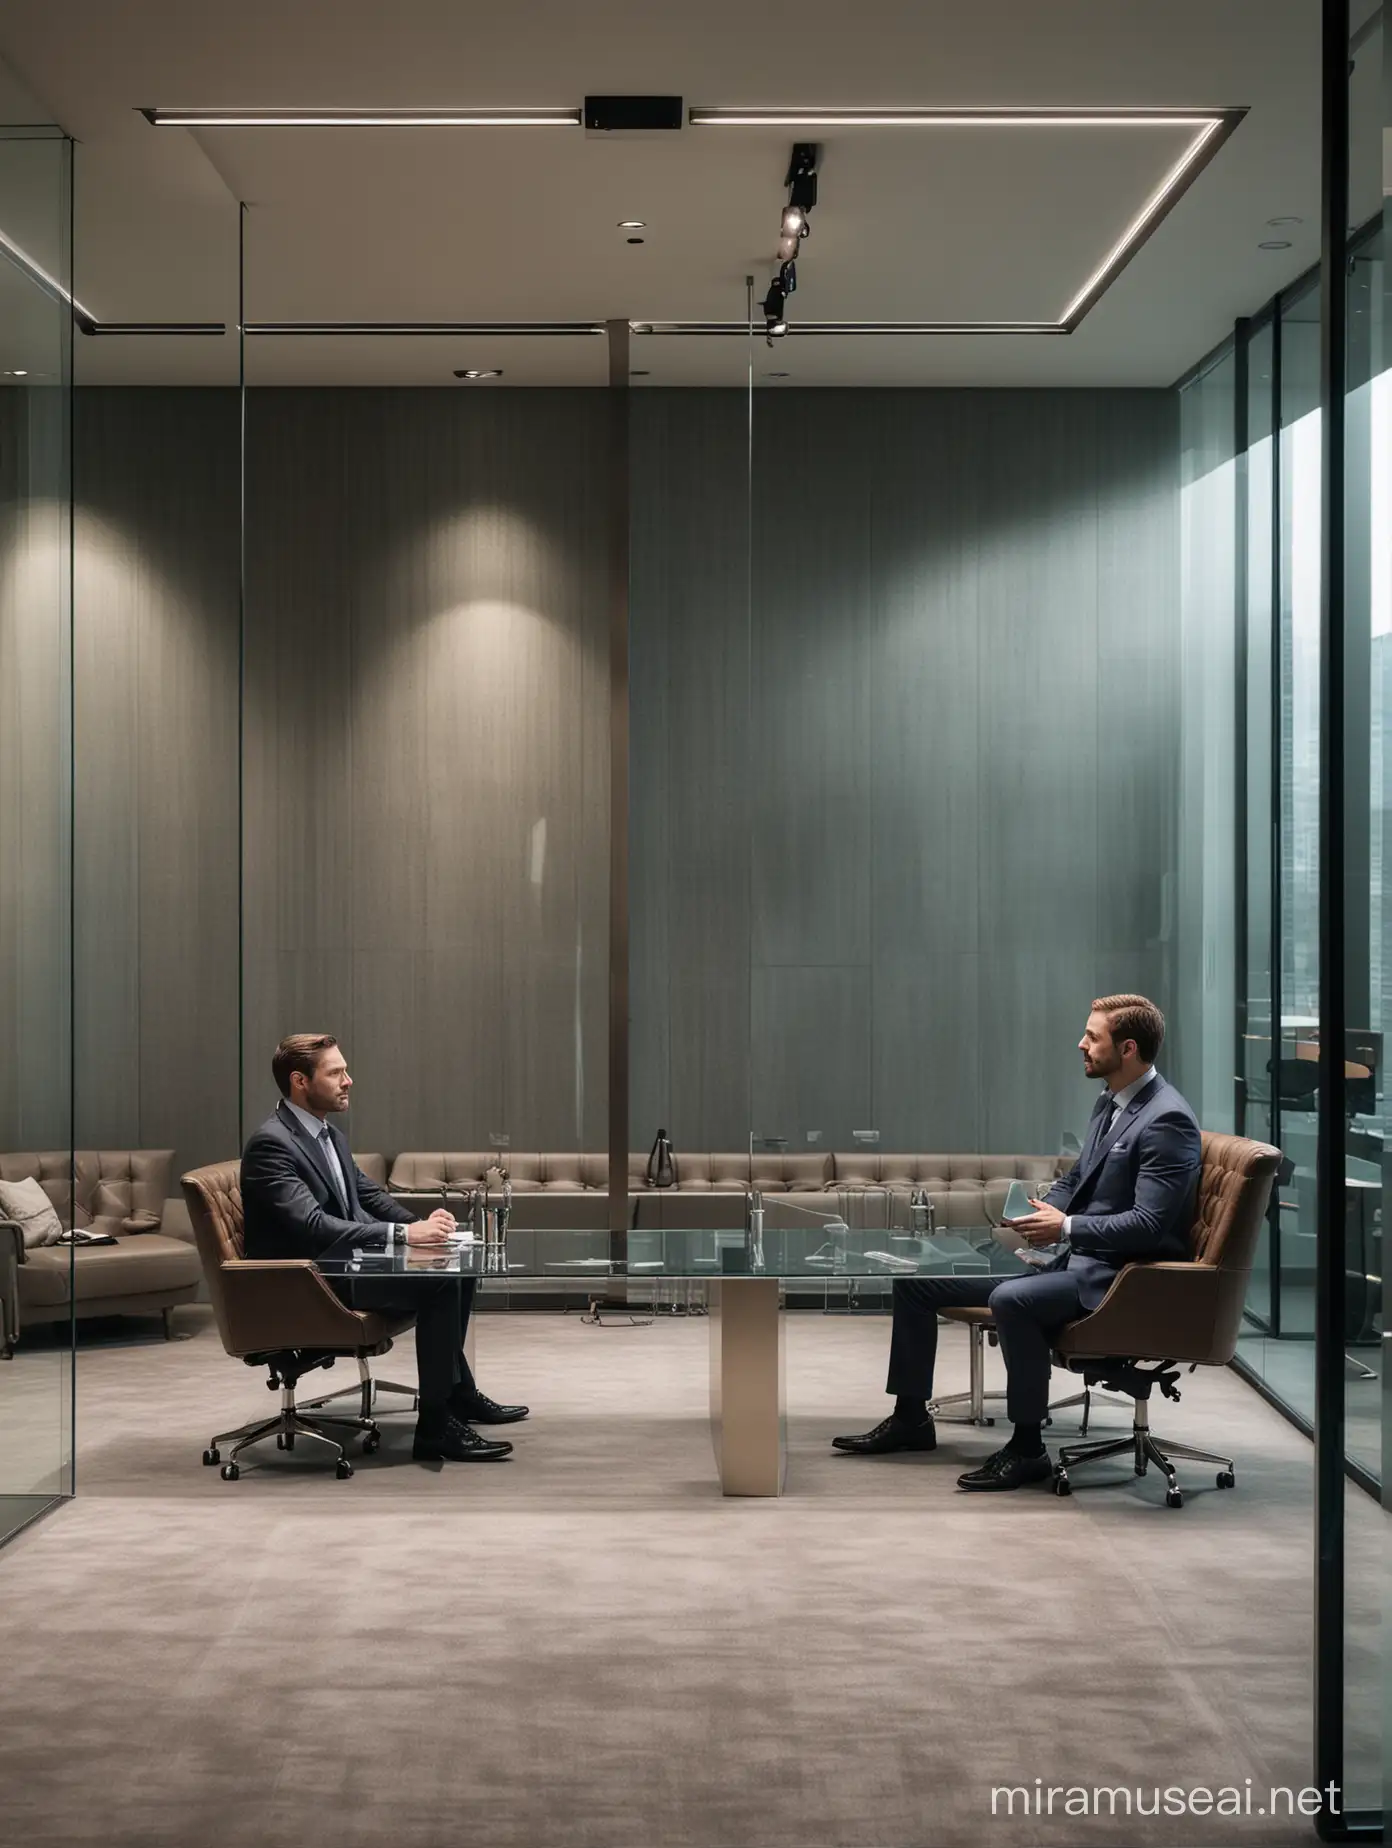 Elegant Corporate Interview in Luxurious Office with Glass Walls